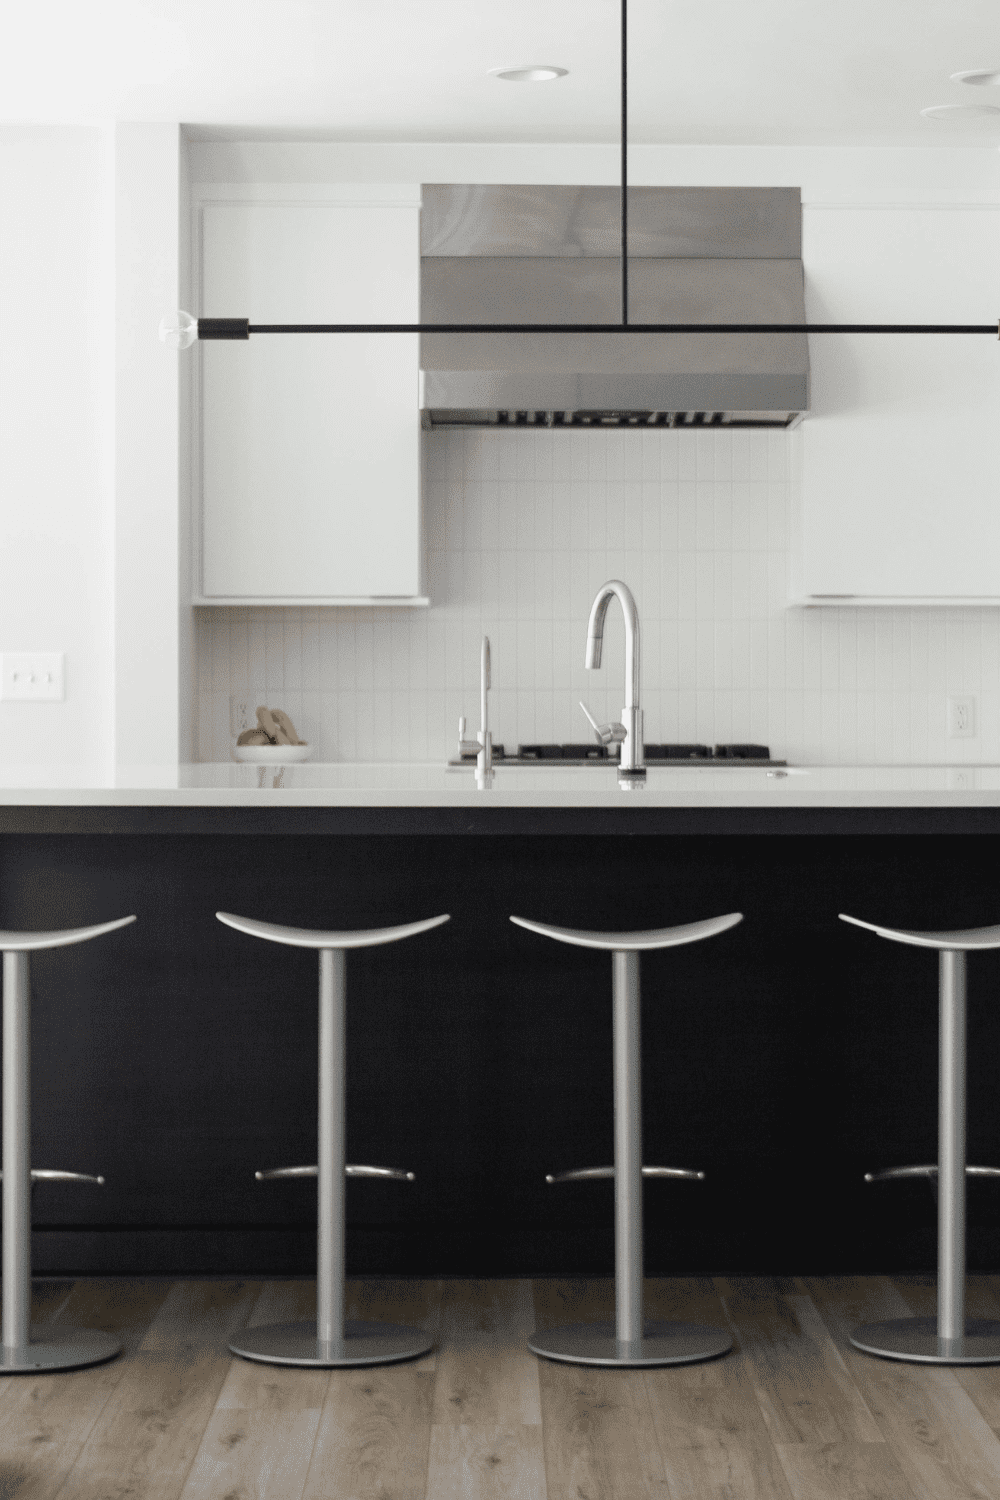 Nicholas Design Build | A black and white kitchen with bar stools.